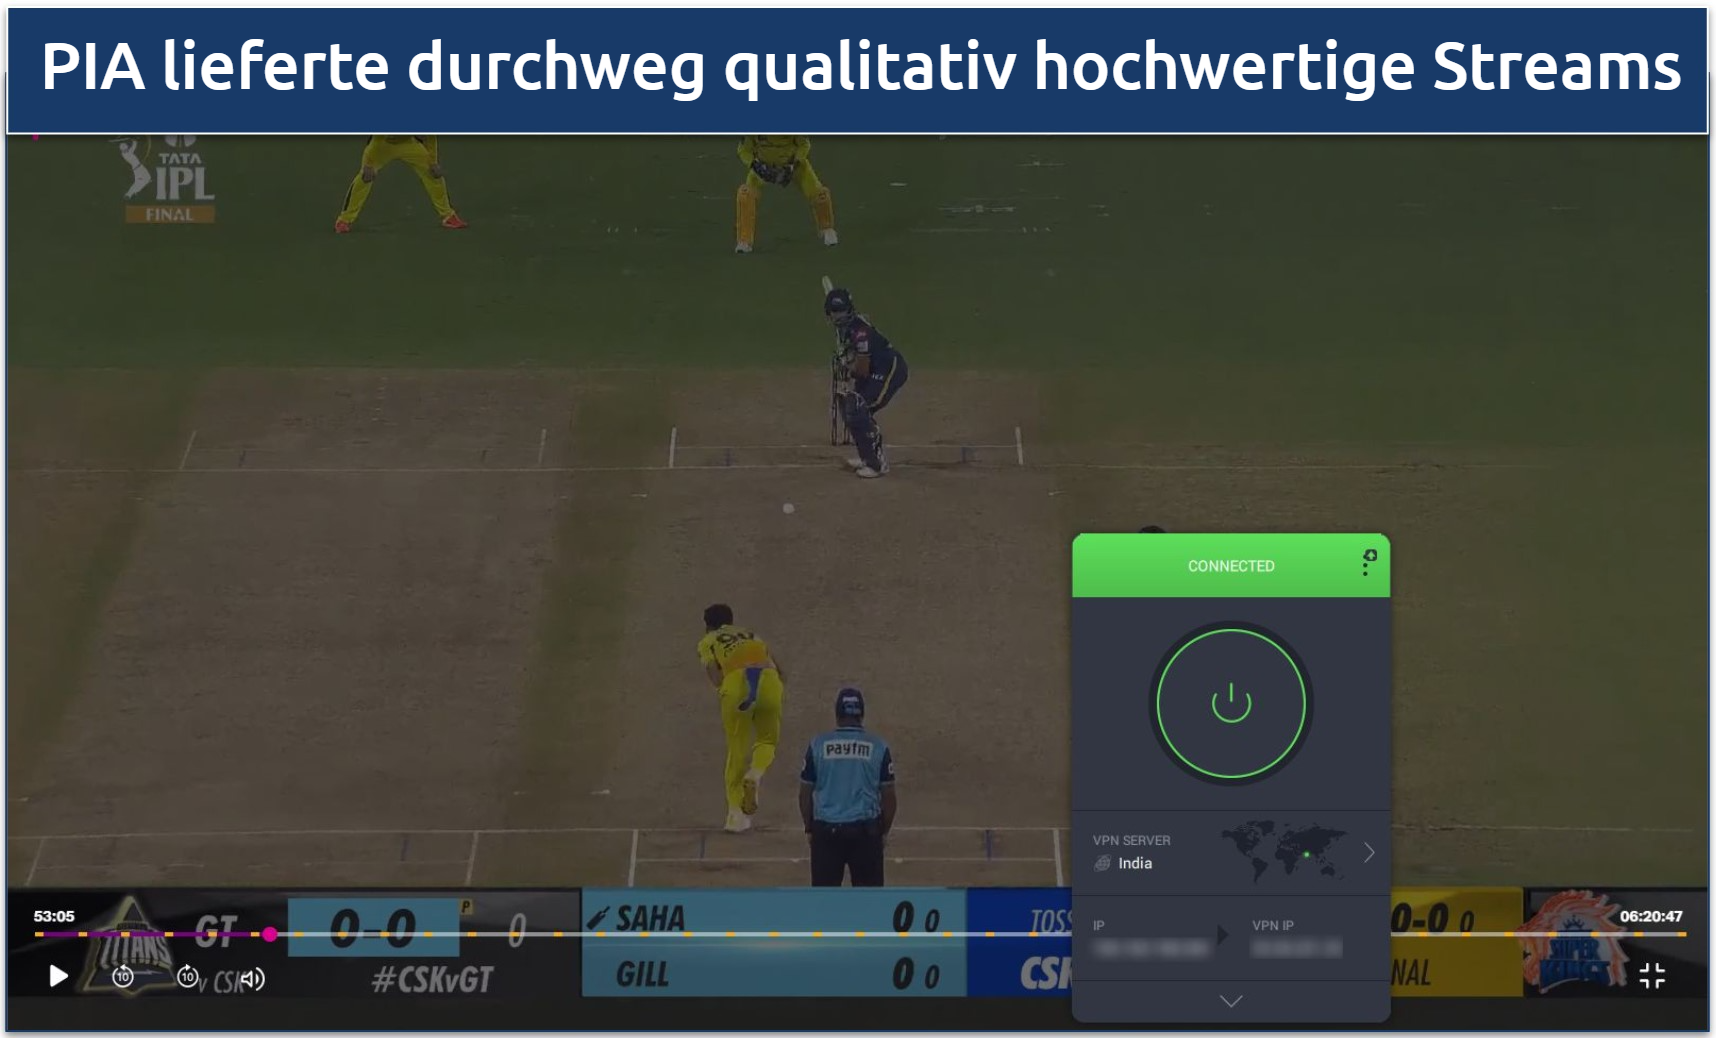 Screenshot of the IPL playing on JioCinema with PIA connected to the India server